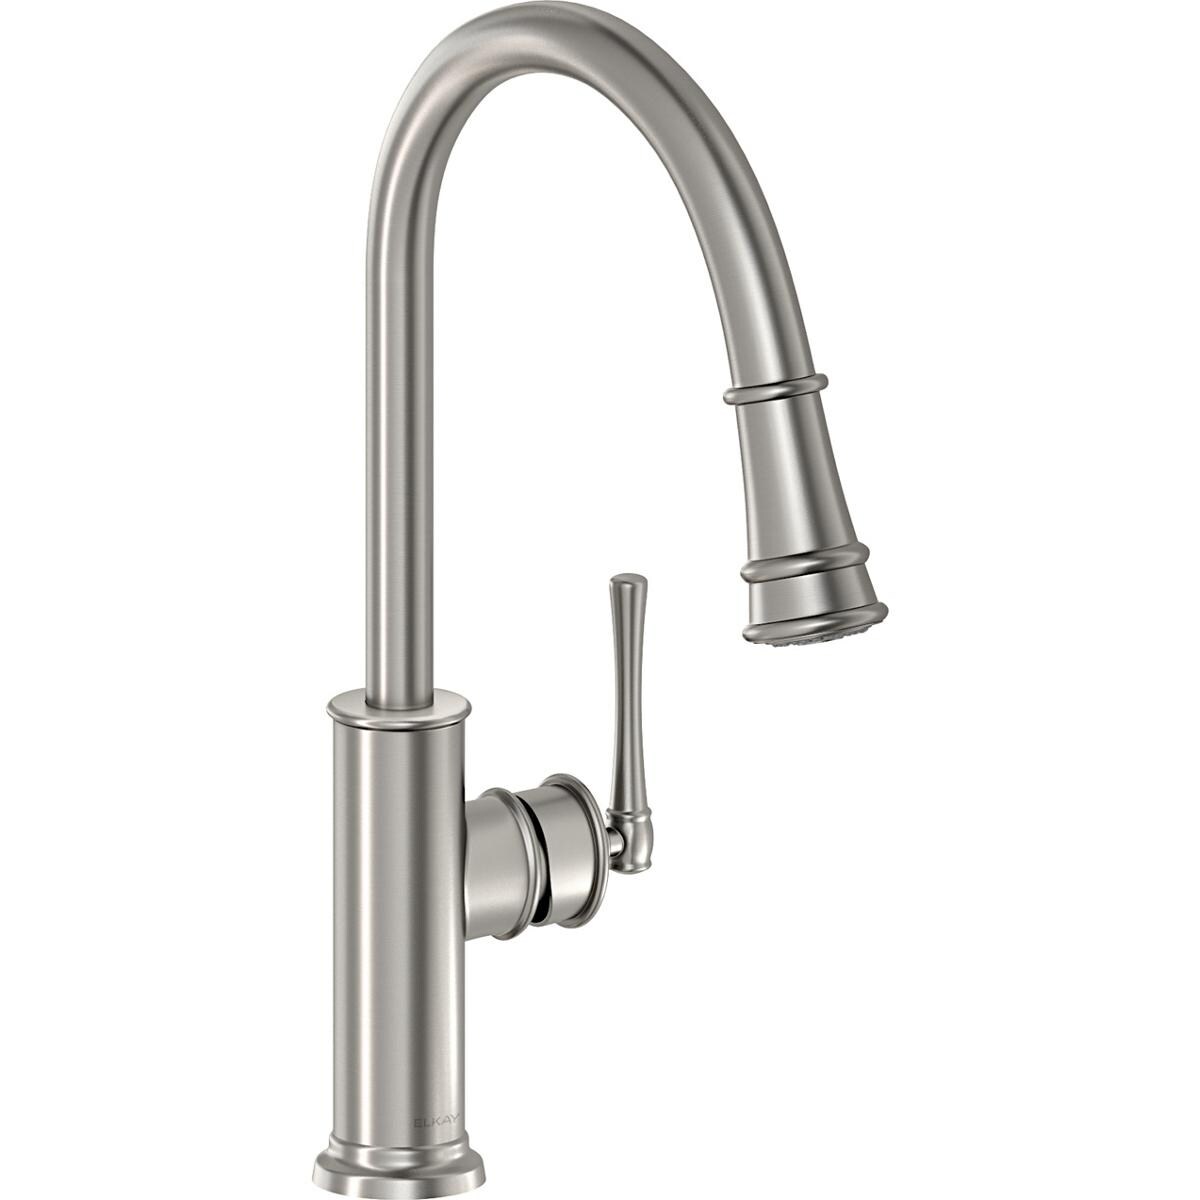 Elkay Explore & Bed Beyond Lever - - 30349532 Faucet and Pull-down with Hole Single Only Spray Forward Handle Kitchen Bath